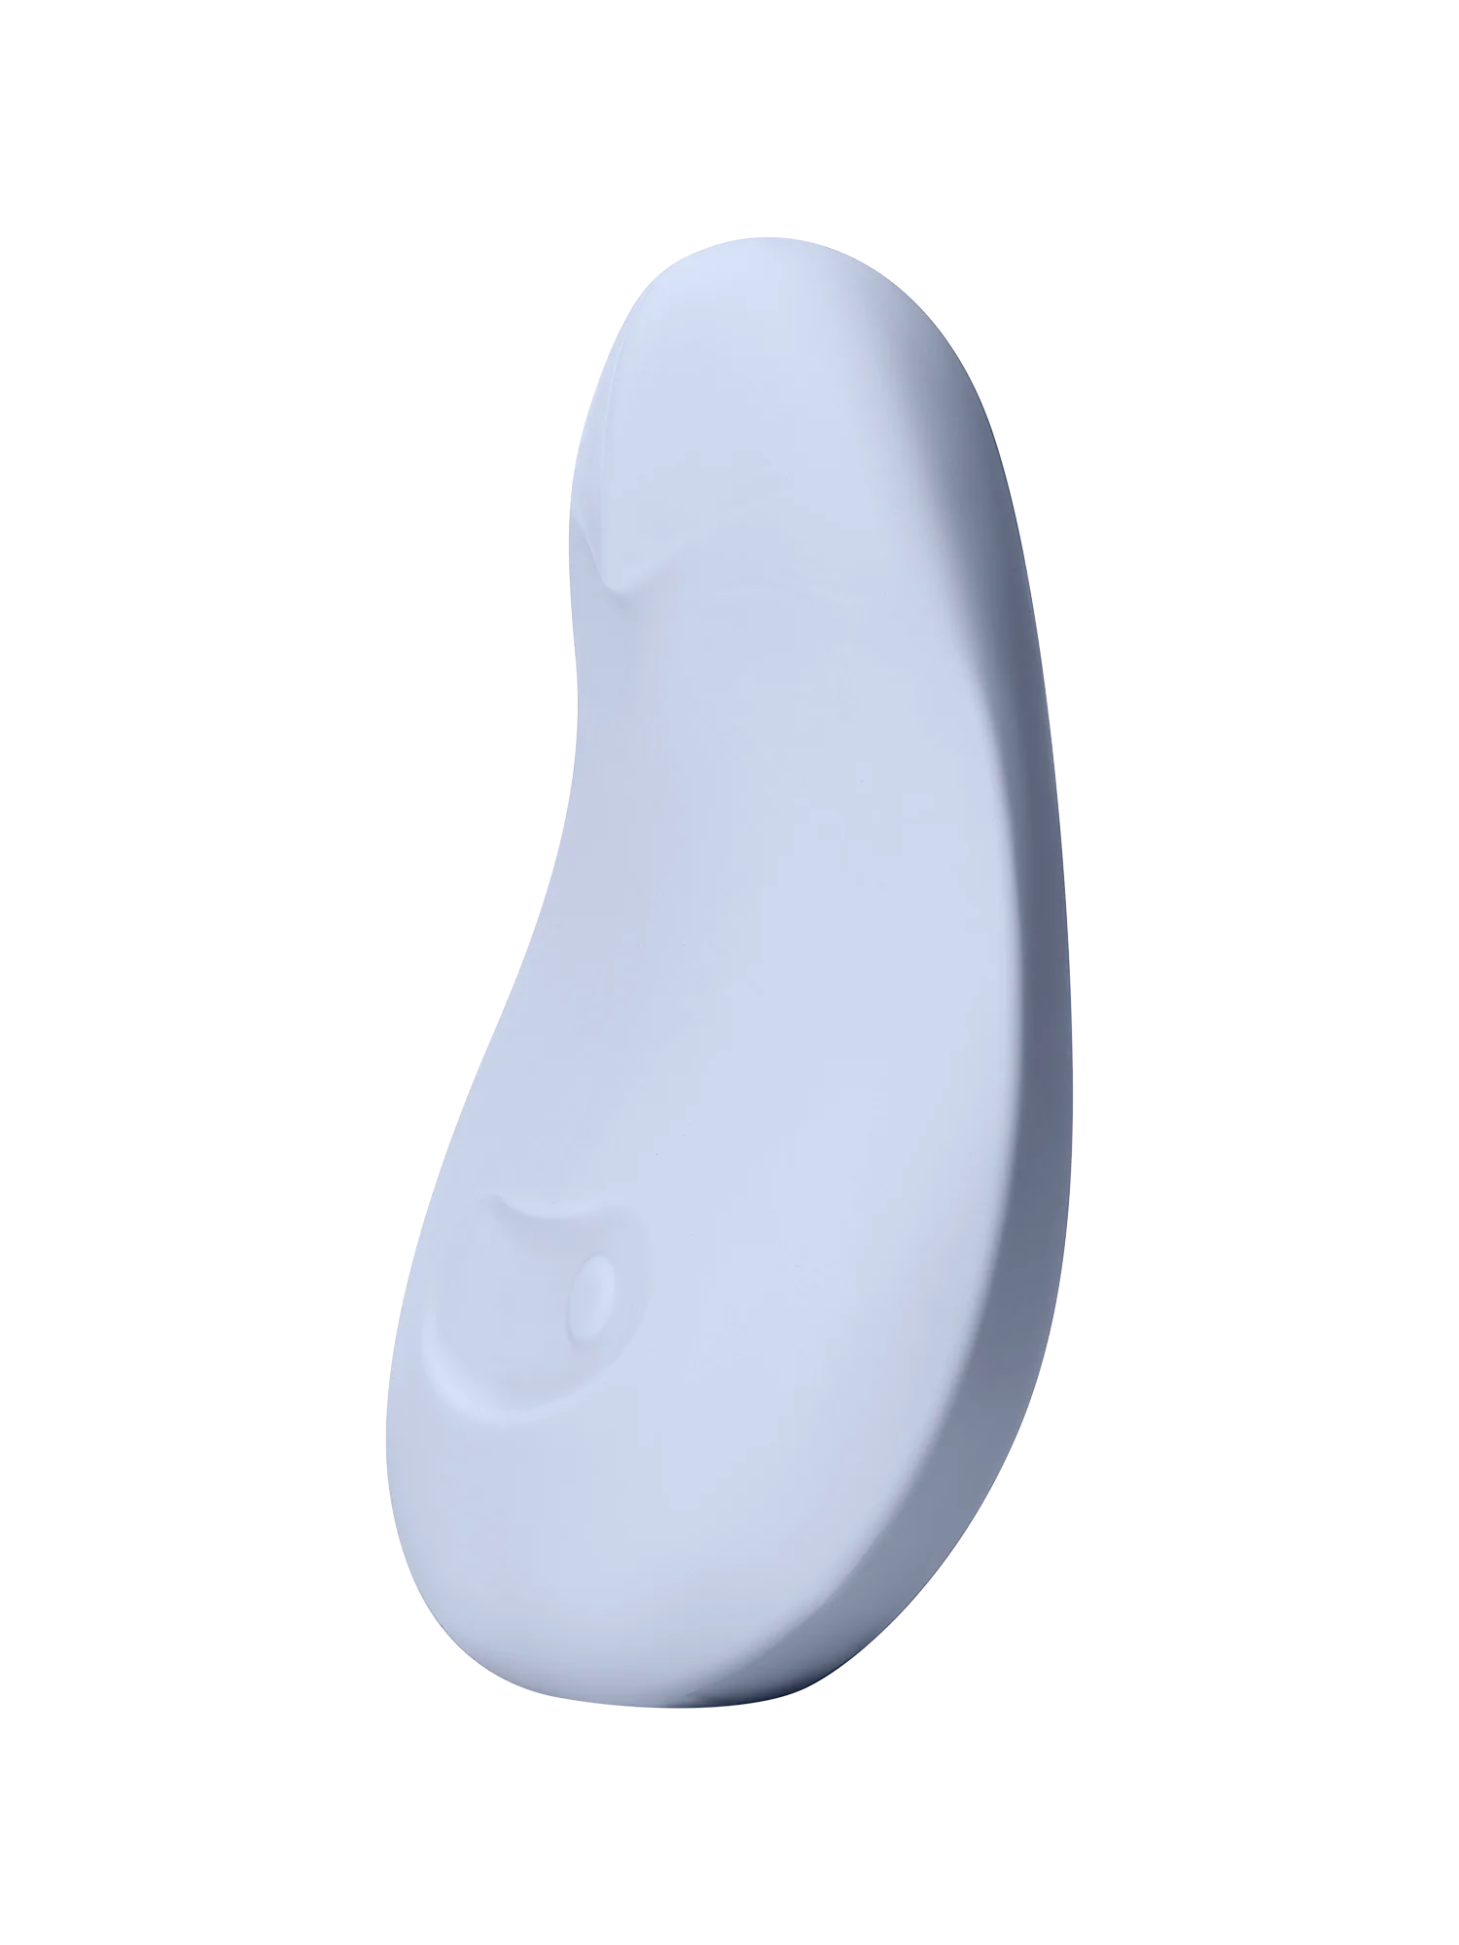 dame pom vibrator, one of the best dame sex toys for external stimulation